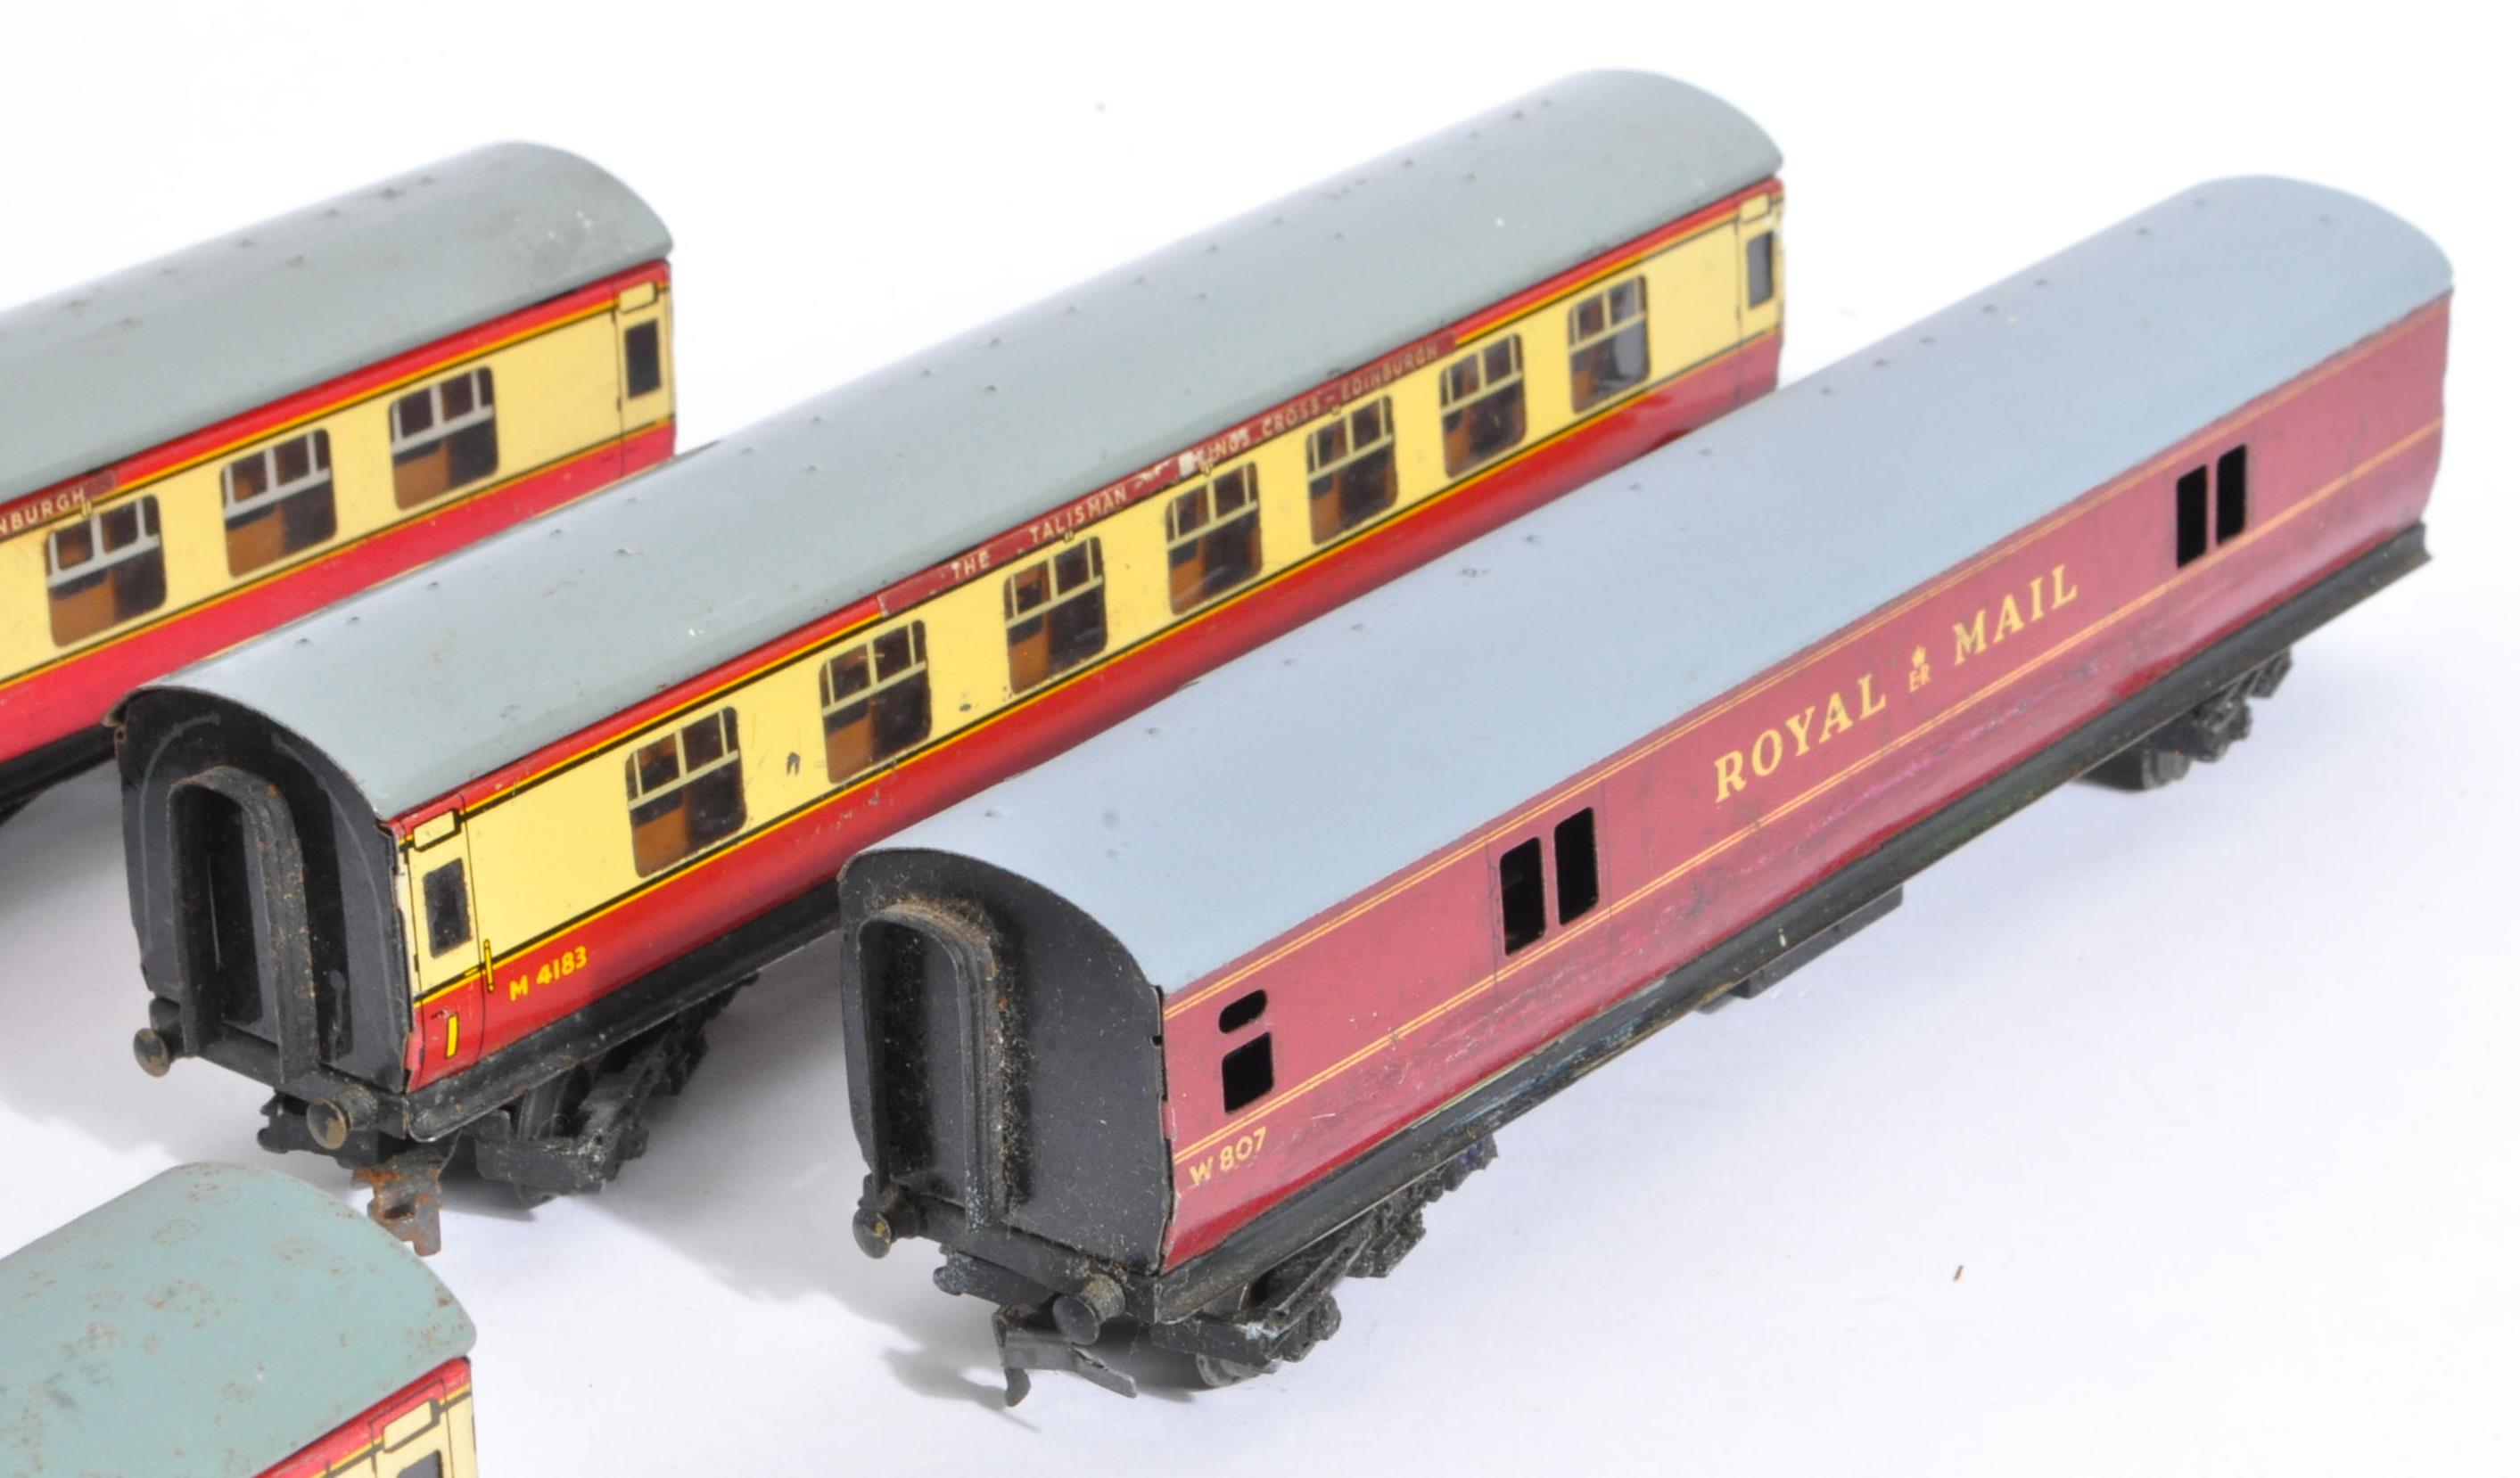 COLLECTION OF HORNBY DUBLO MODEL RAILWAY TRAINSET CARRIAGES - Image 4 of 5